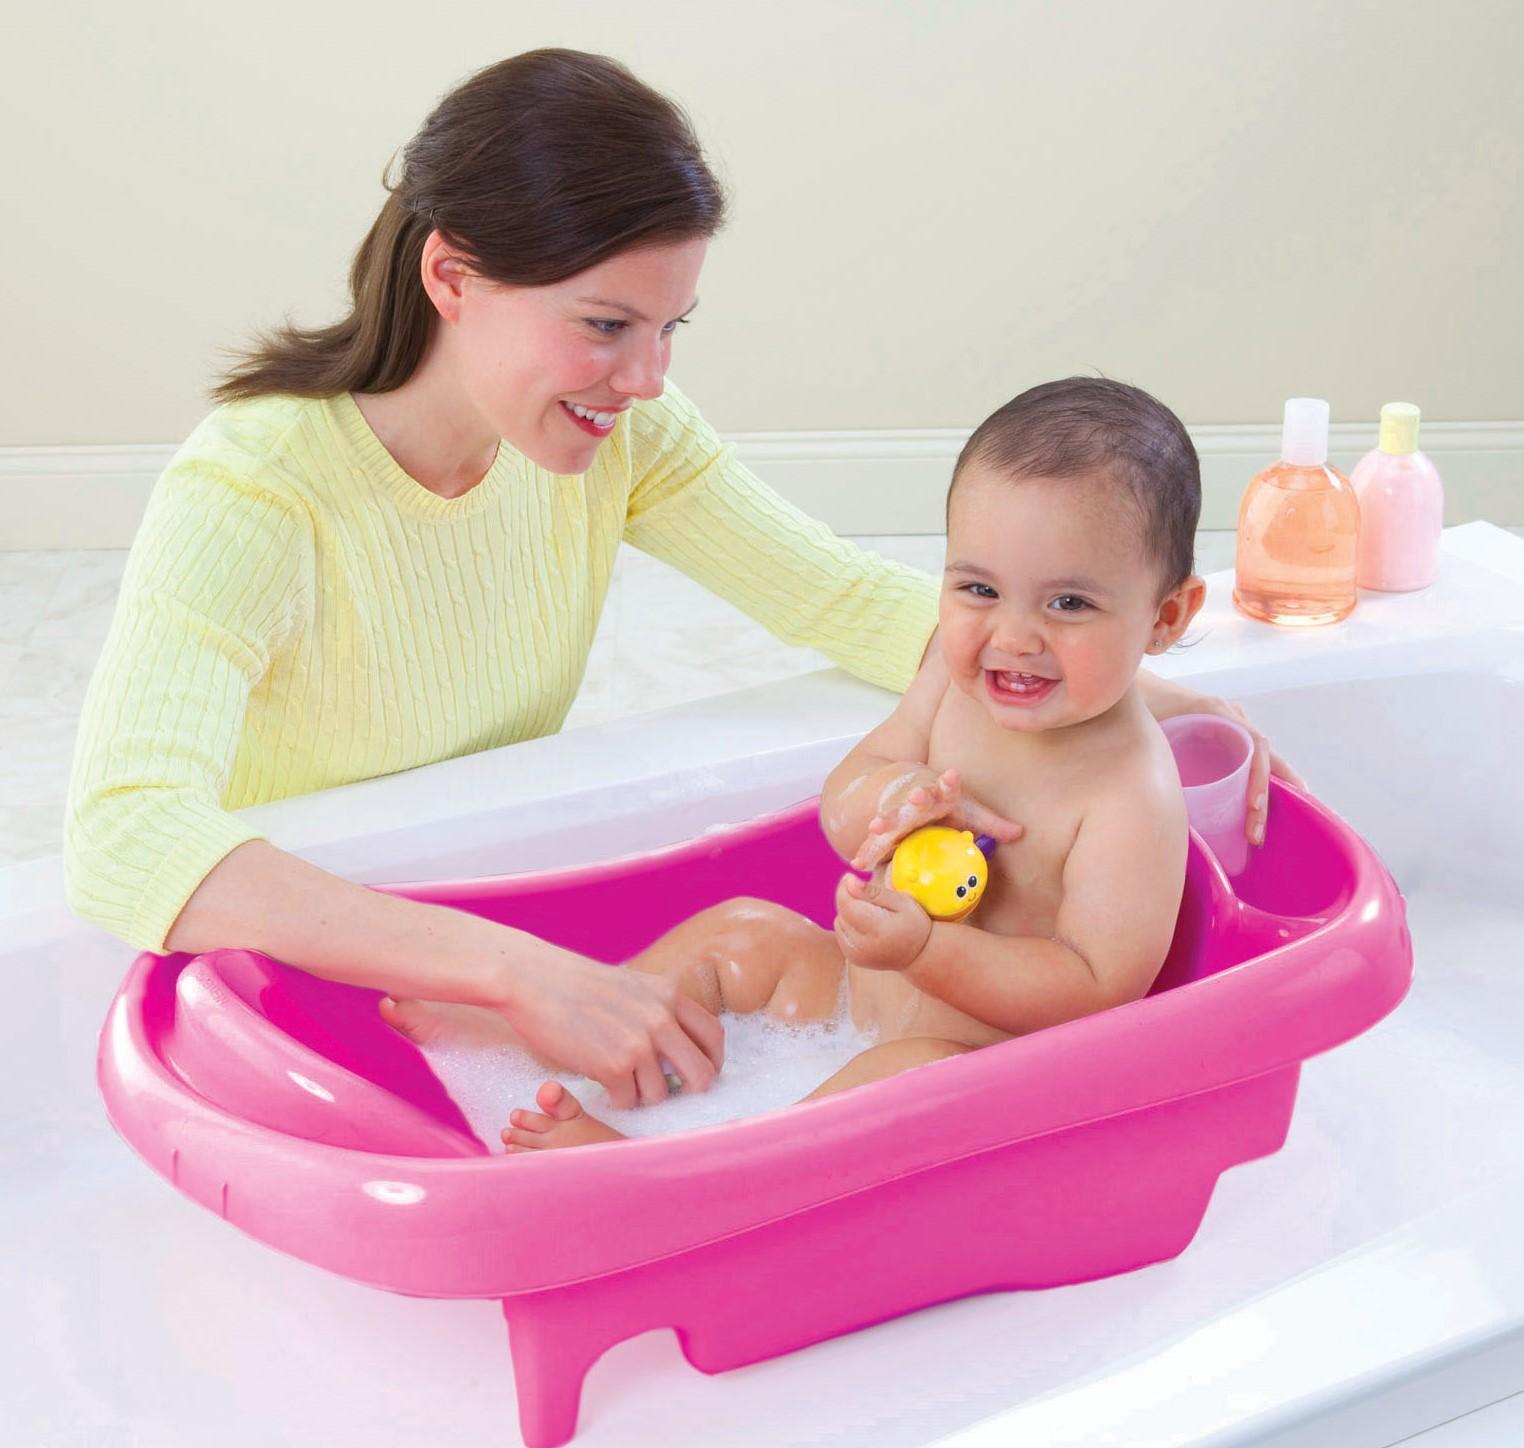 Baby being placed in a bathtub